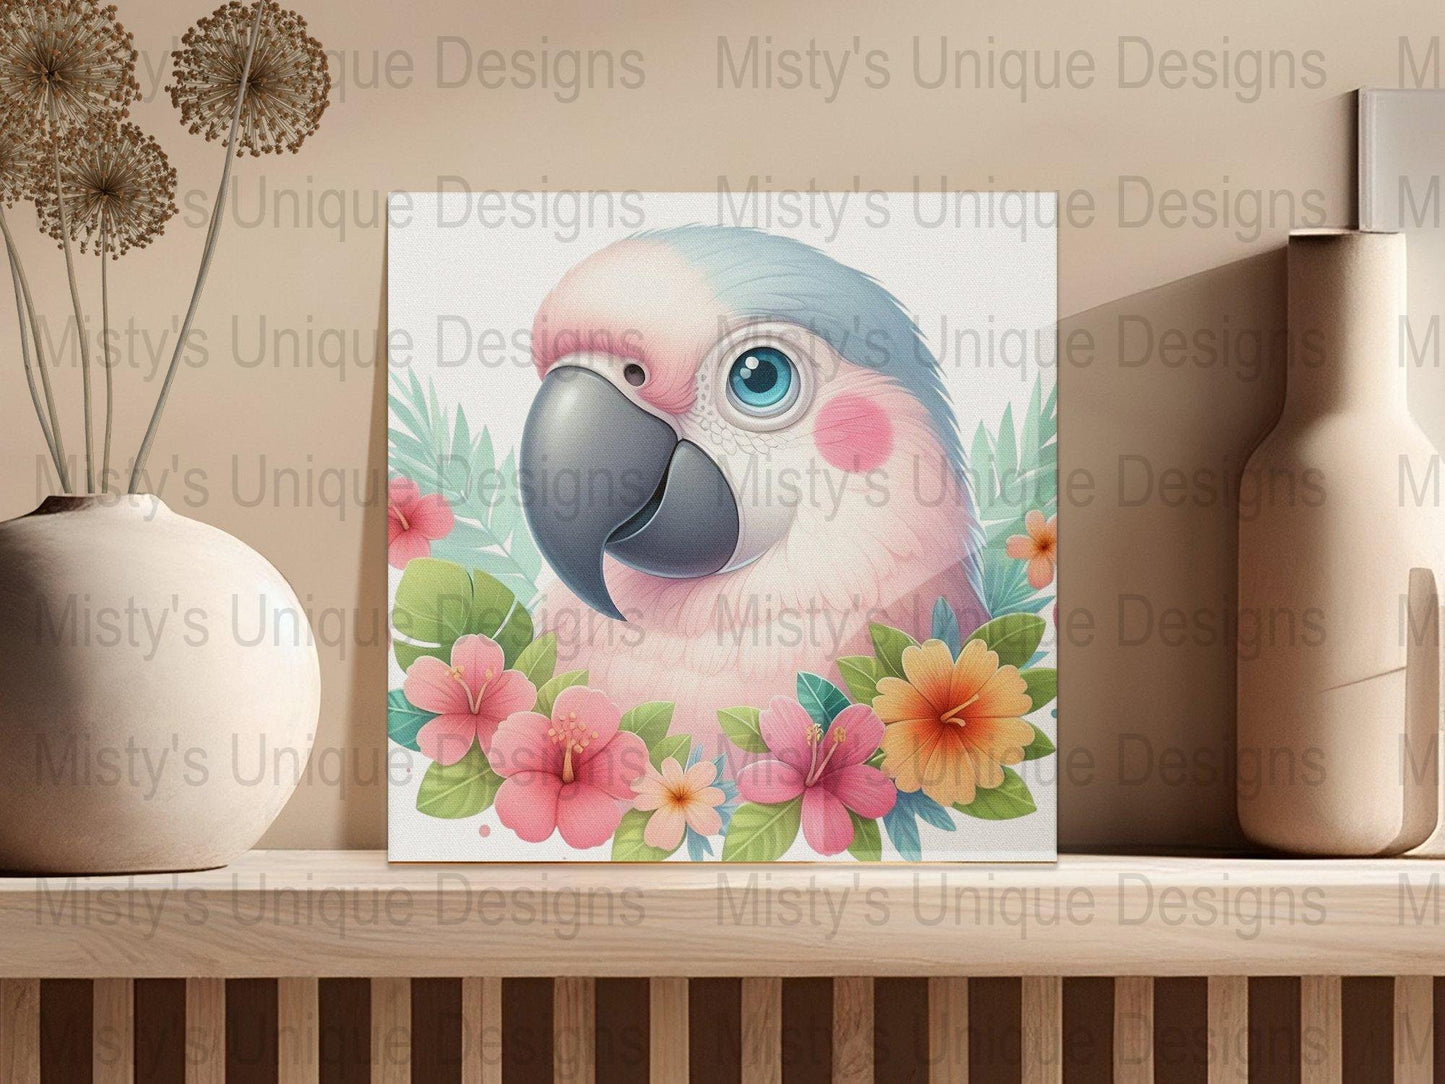 Cute Pink Parrot Clipart, Tropical Bird PNG, Digital Download, Floral Bird Illustration, Craft Supplies, Scrapbooking, Commercial Use